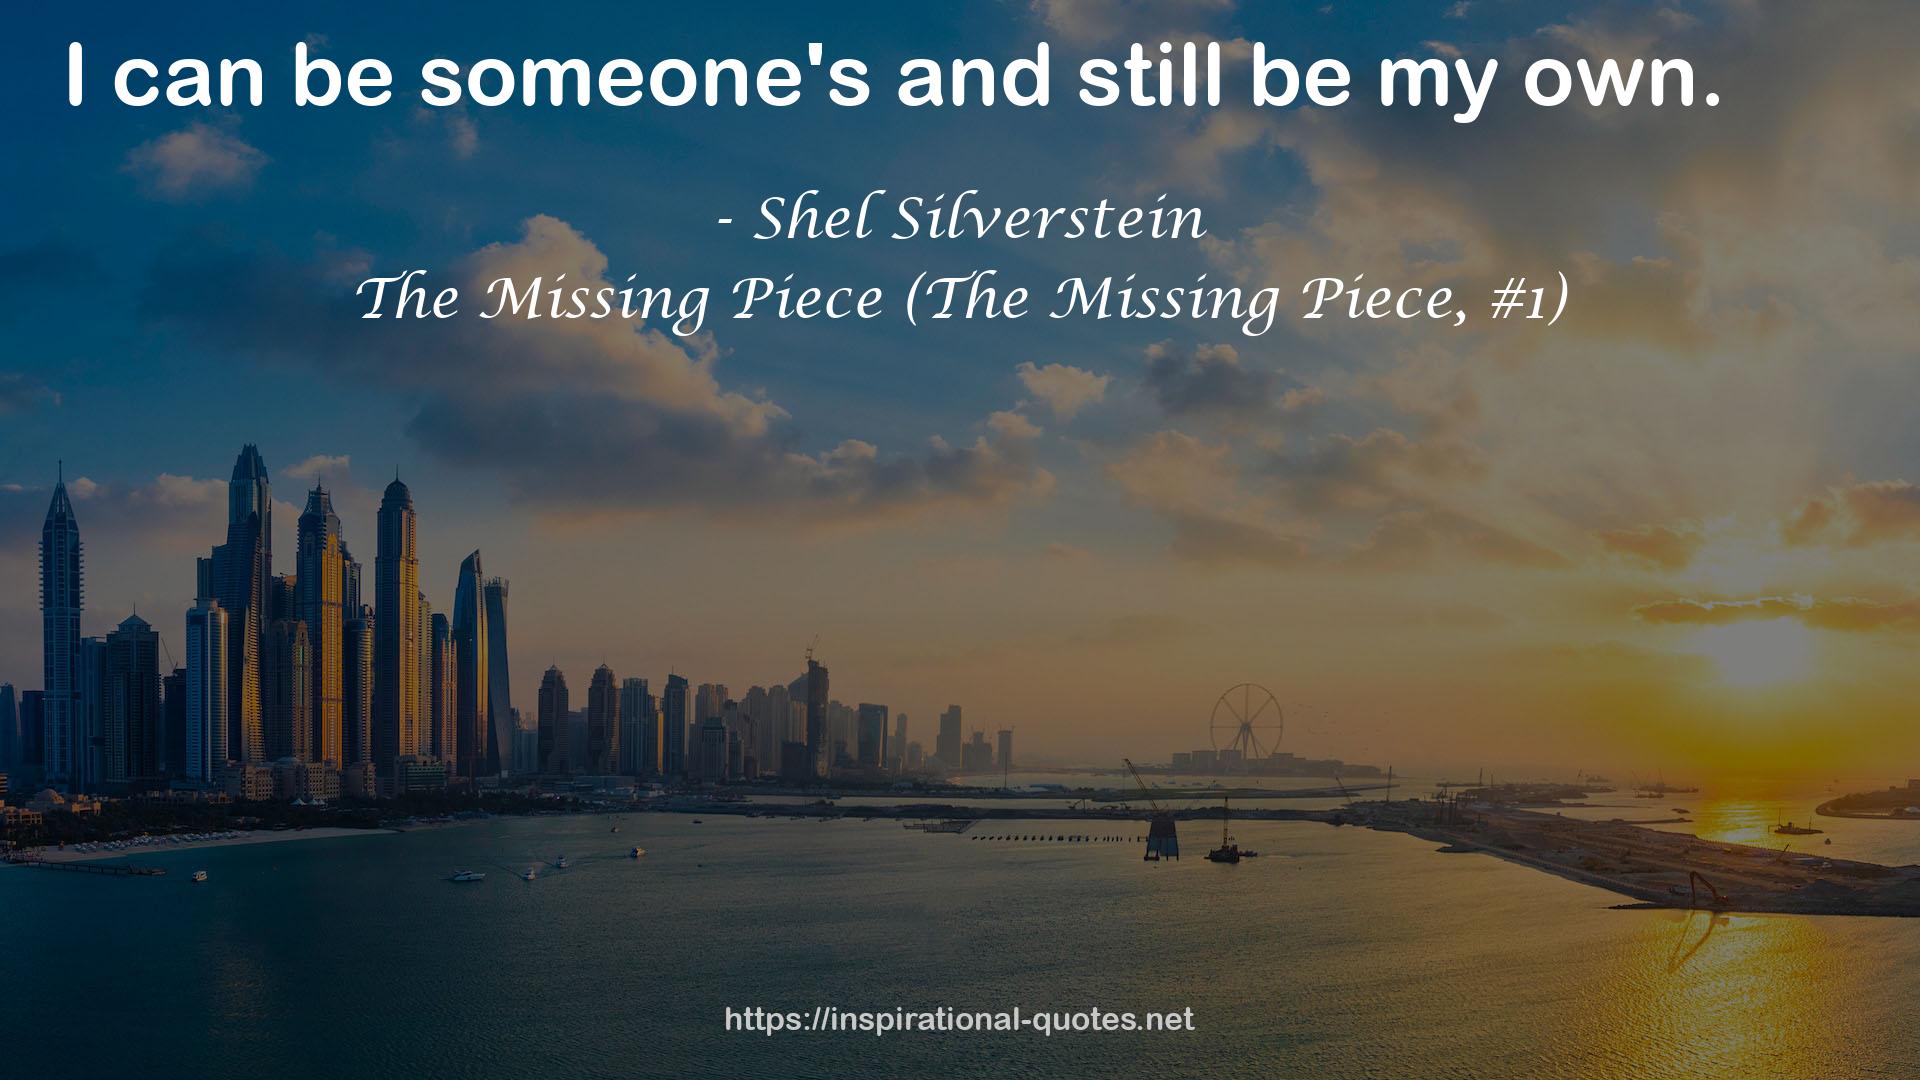 The Missing Piece (The Missing Piece, #1) QUOTES